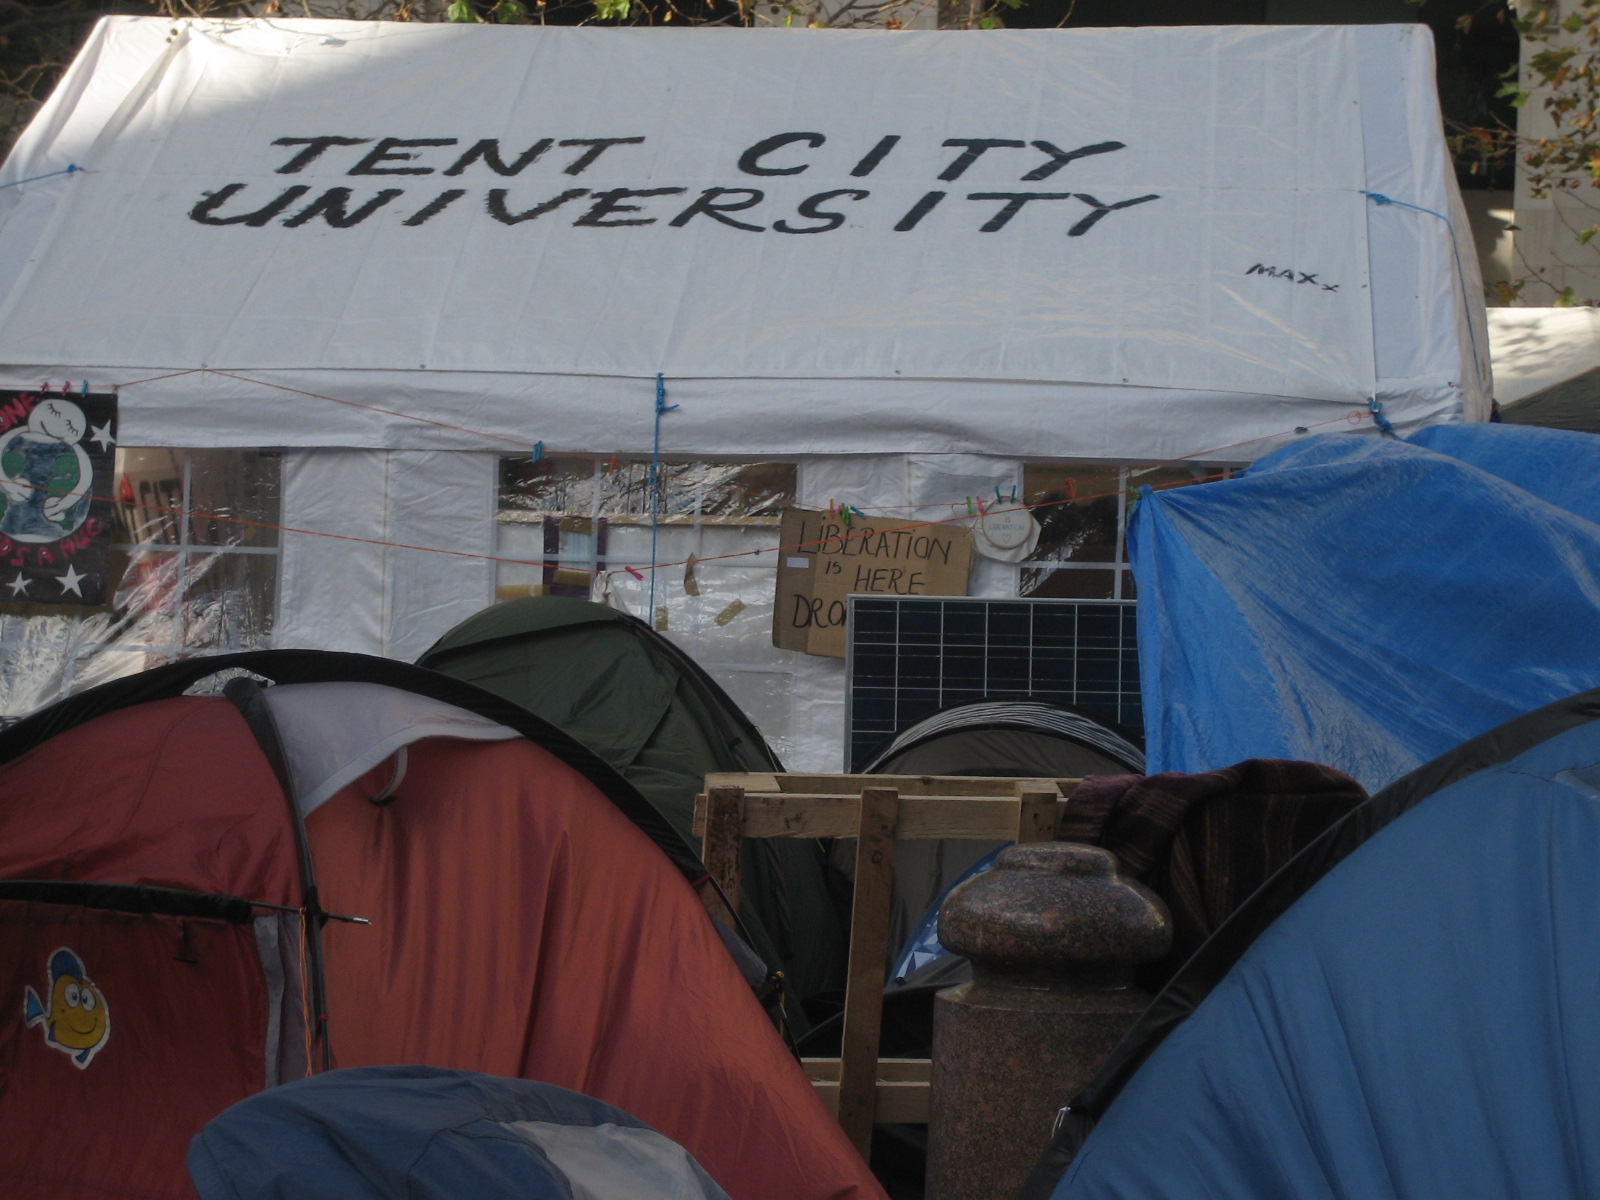 From the Tent City Uni to Warwick: Occupy the University